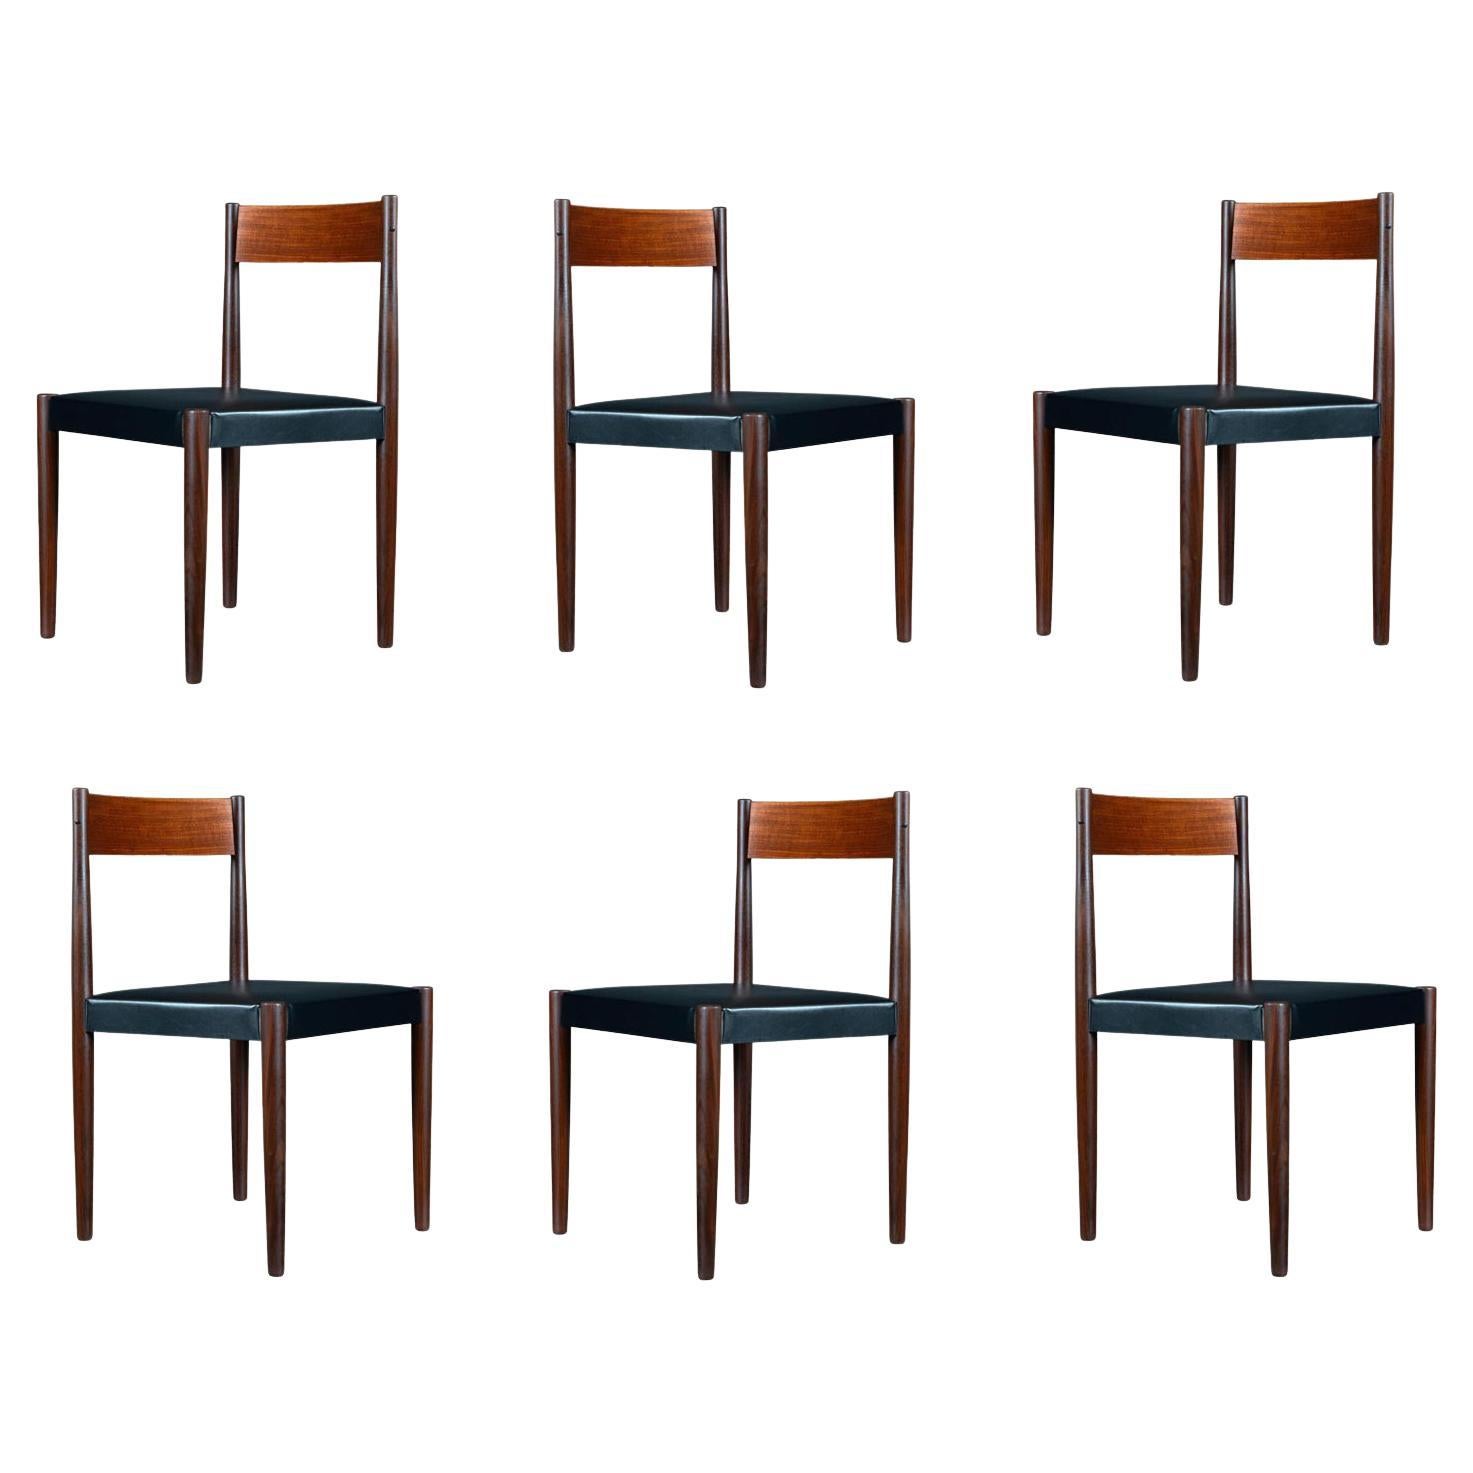 Six Poul Volther for Frem Røjle Danish Teak Dining Chairs